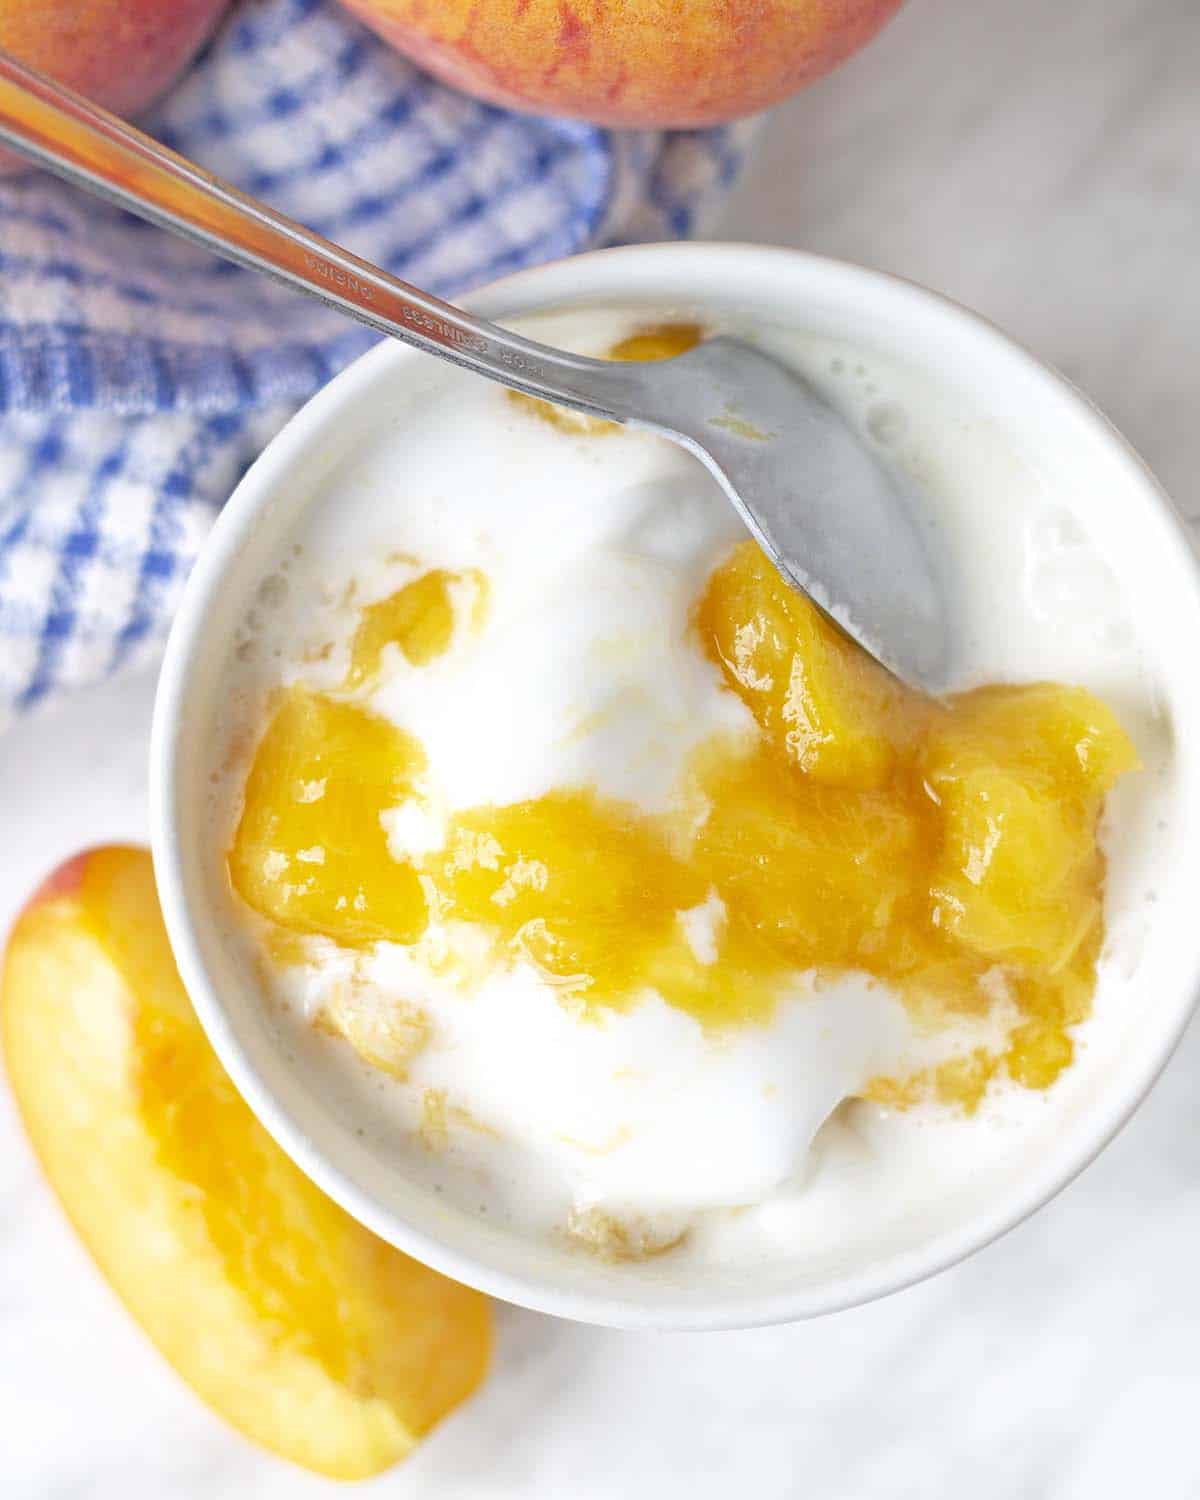 Coconut ice cream in a small bowl with fresh peach sauce swirled into the ice cream, a spoon sits in the bowl.